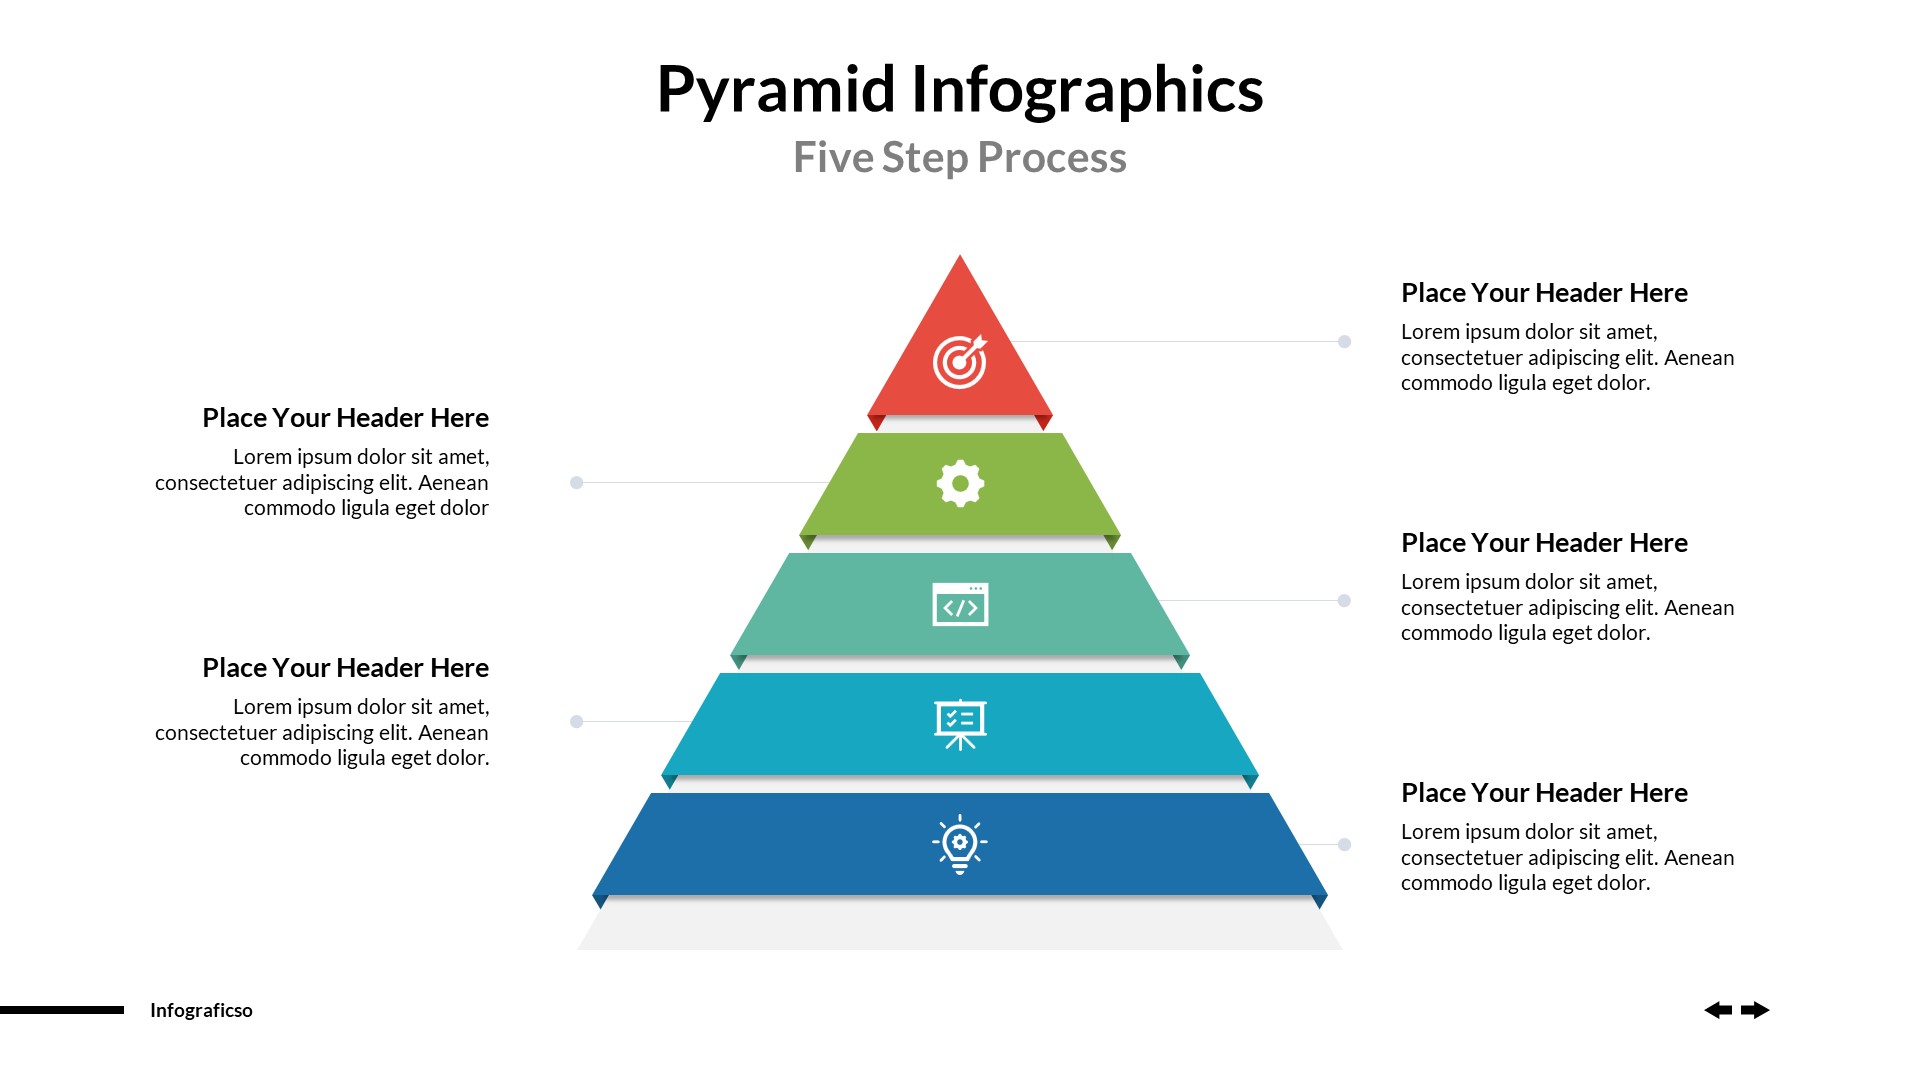 Pyramid Infographics Powerpoint Template by graficso | GraphicRiver